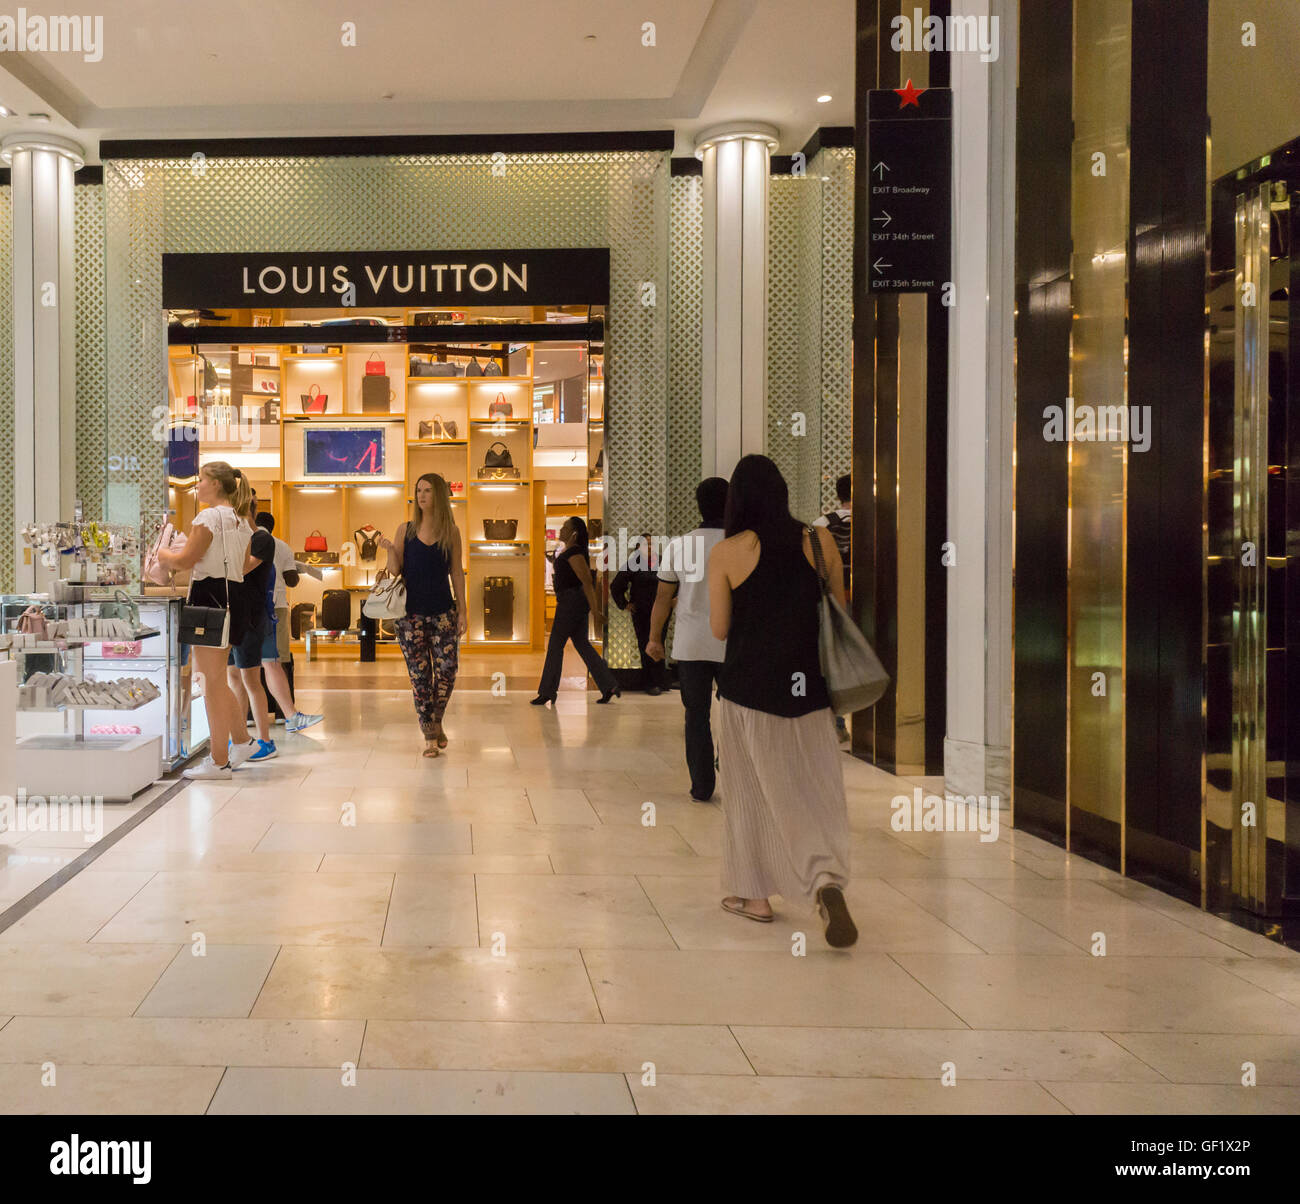 The Louis Vuitton boutique in the Macy's Herald flagship store in New York on Thursday, July 21, 2016. For first time 70 years the Louis Vuitton brand, part of